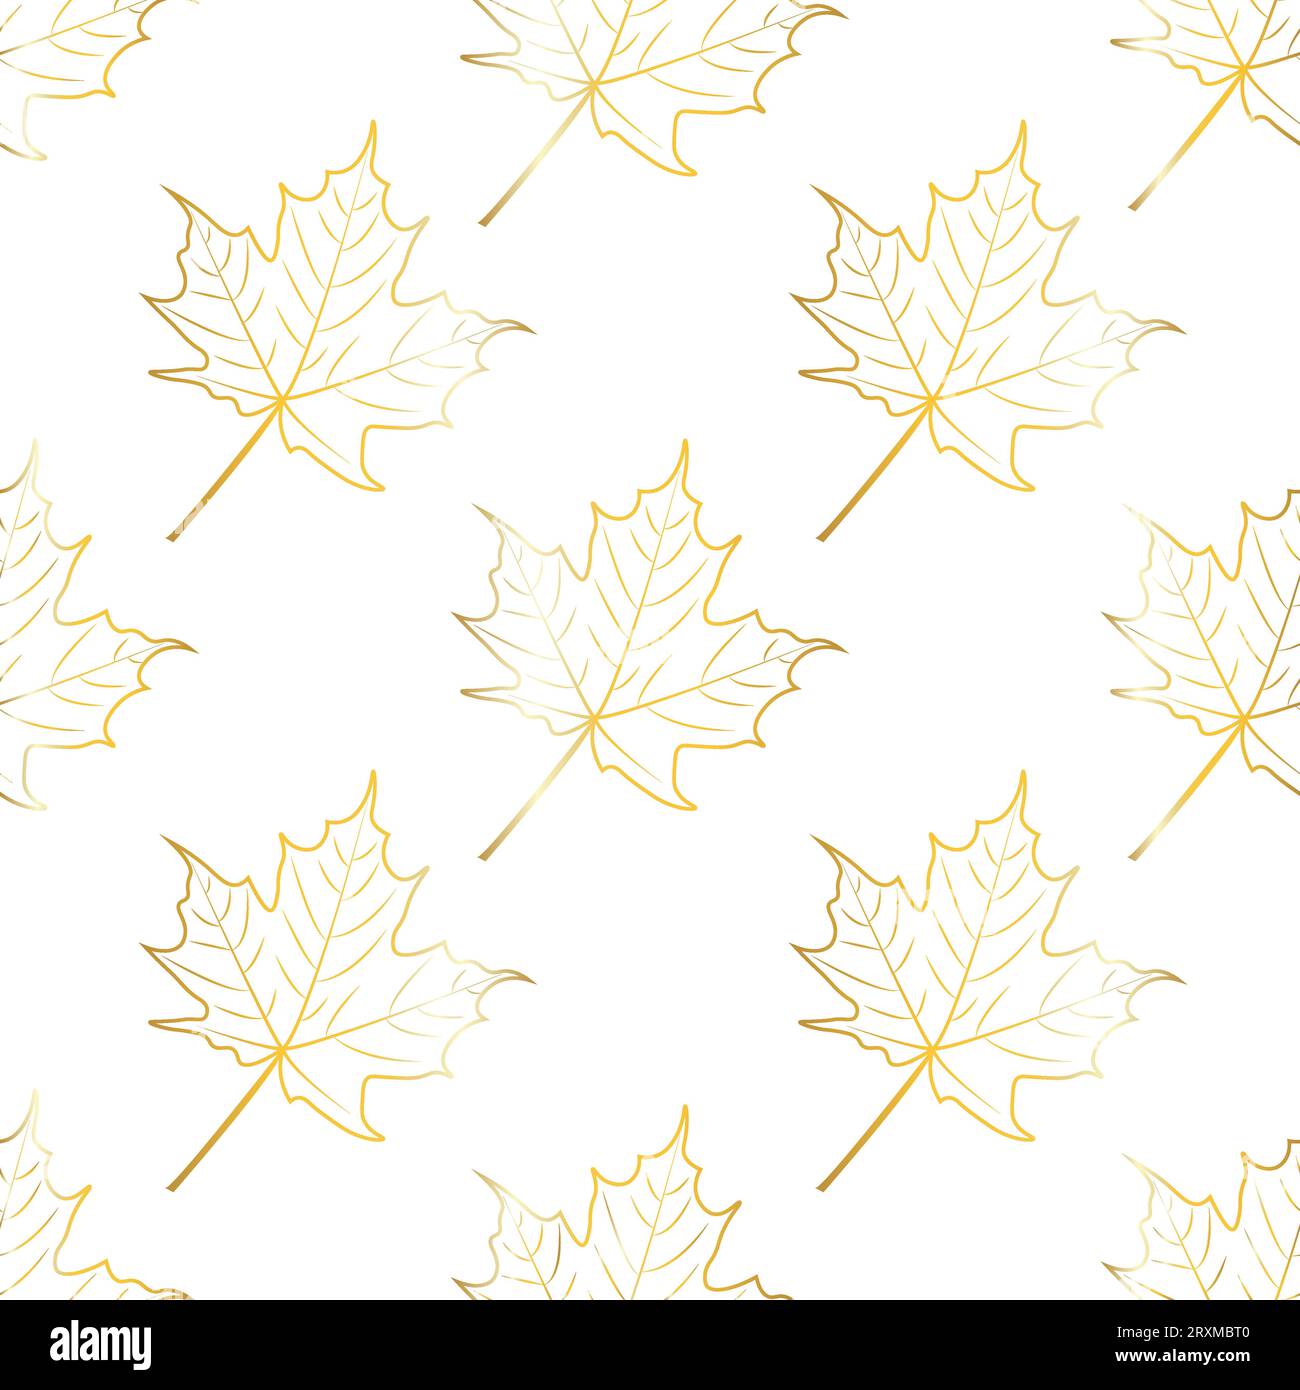 Fall leaf seamless pattern. Autumn foliage. Background for your design wallpapers, pattern fills, web page, surface textures. Vector illustration Stock Vector